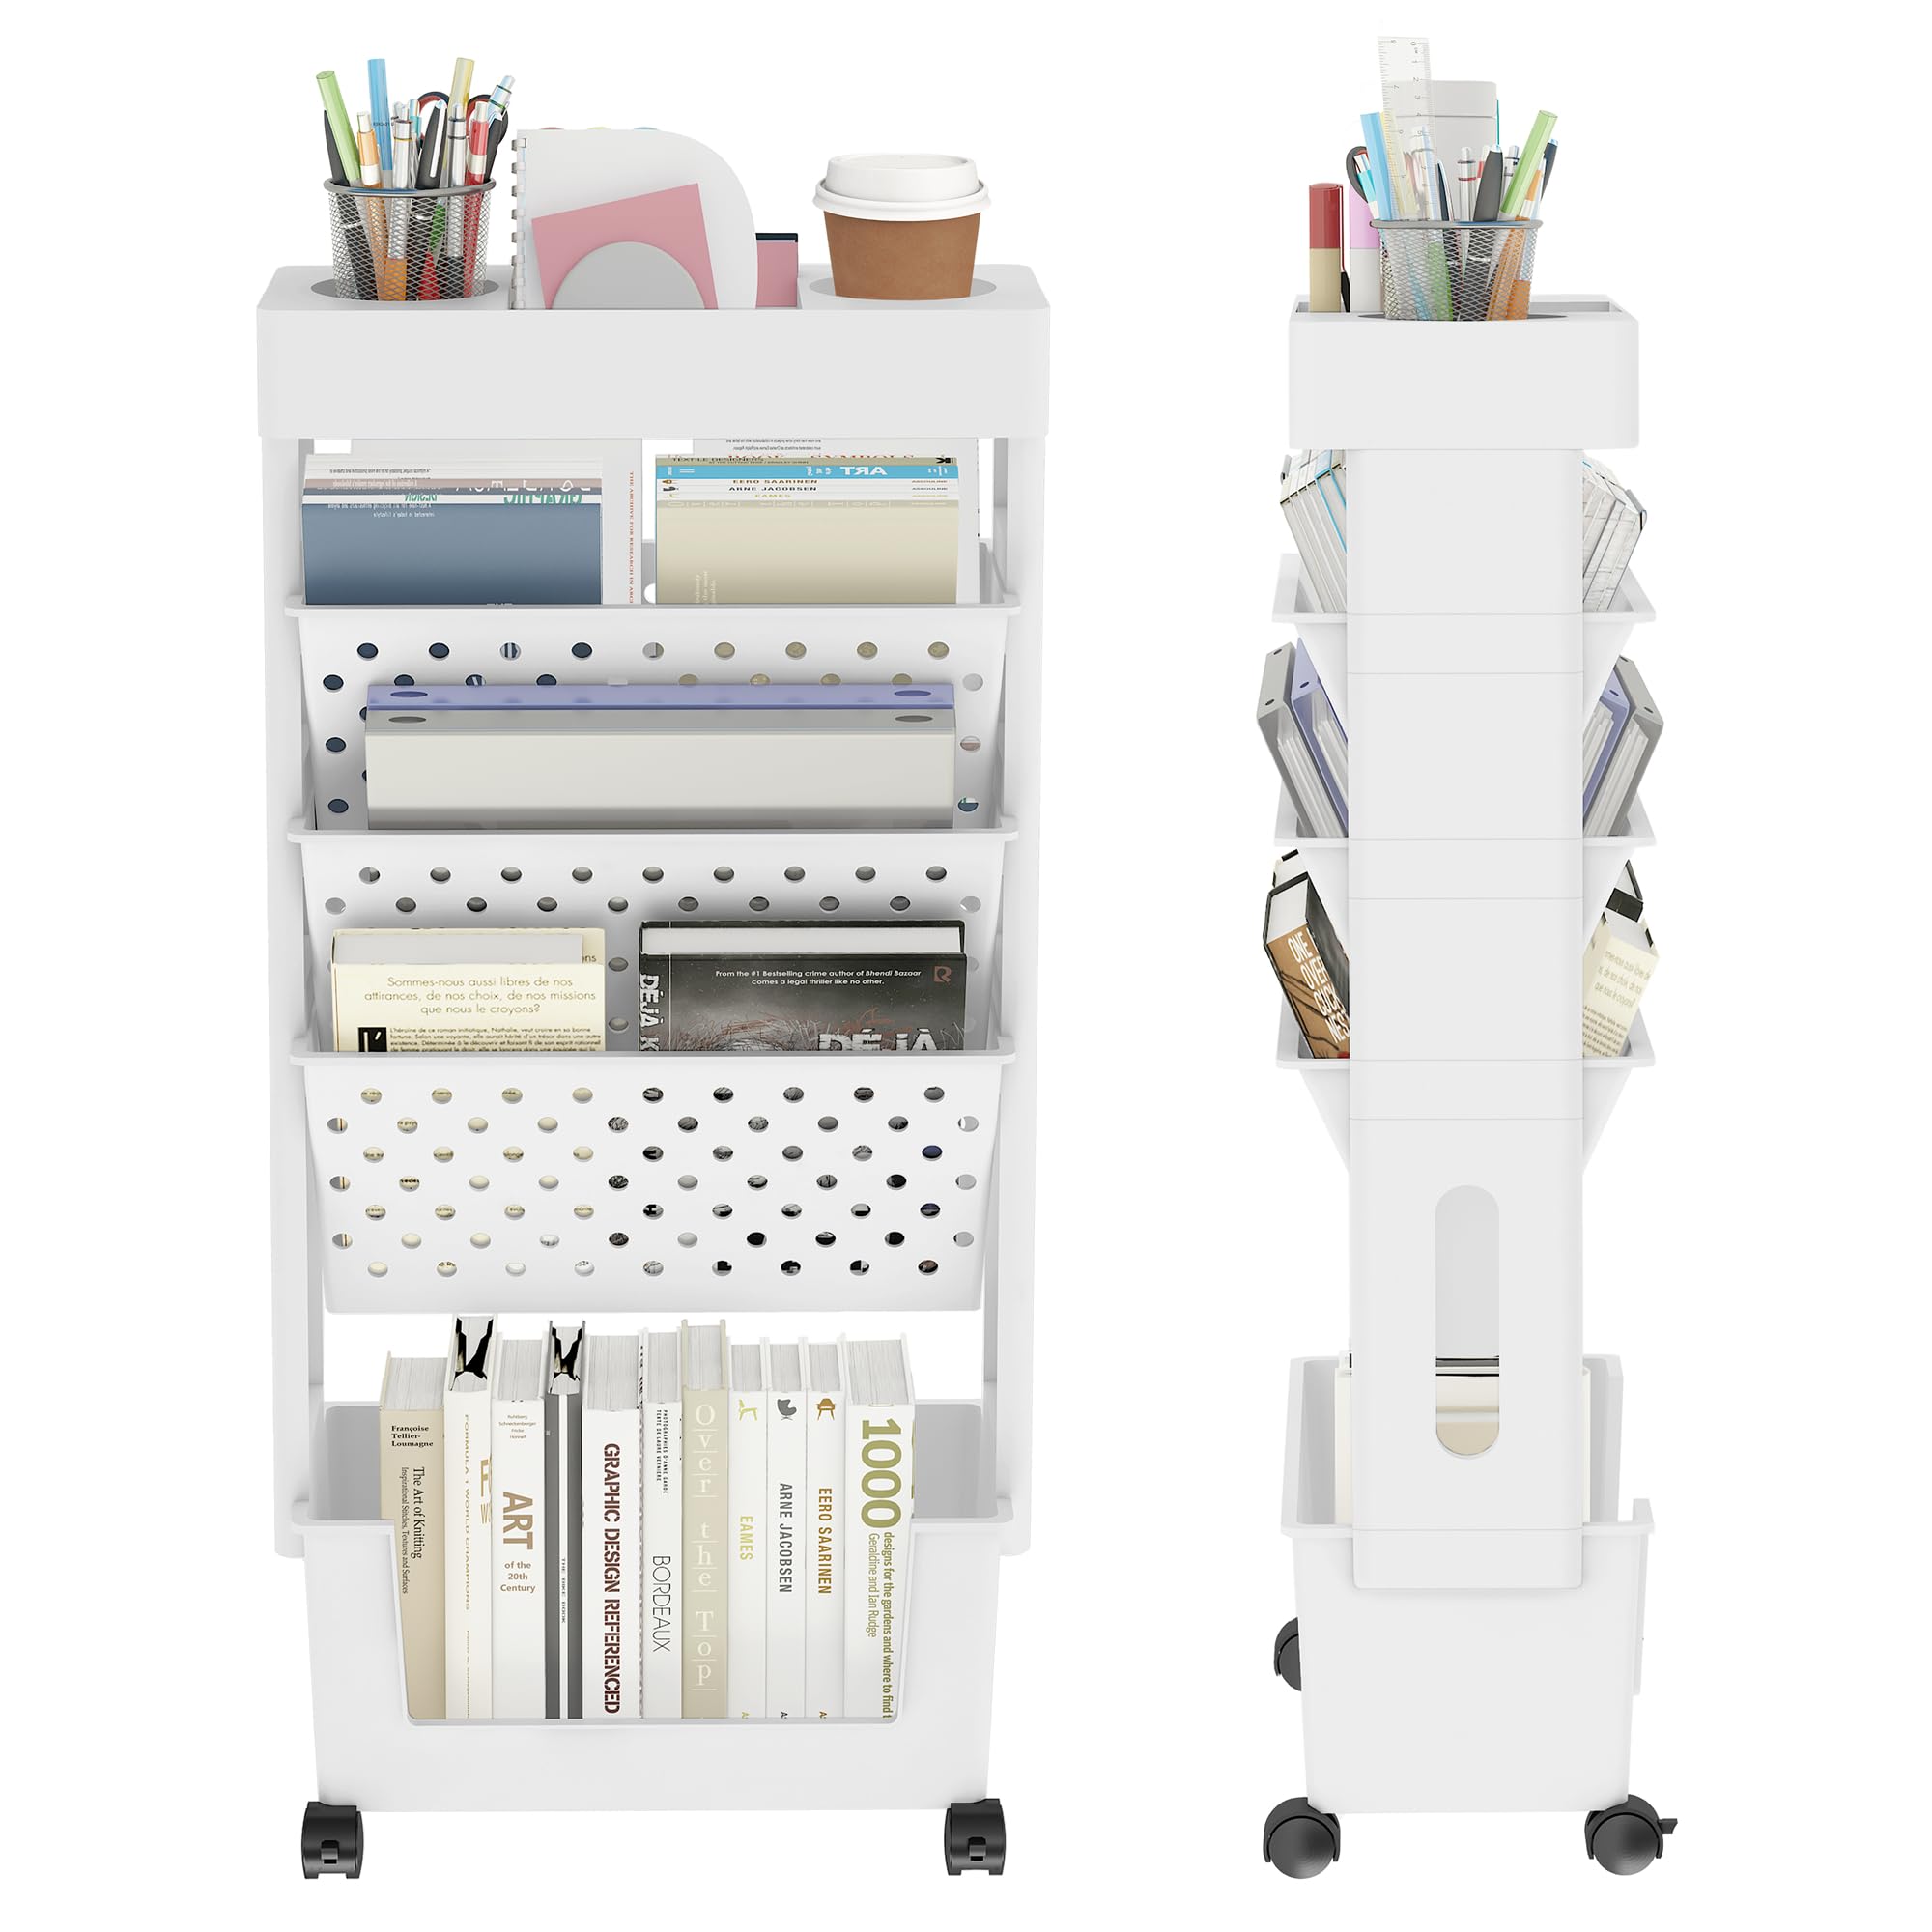 YEMUNY 5 Tier Rolling Utility Cart Multi-Functional Movable Storage Book Shelves with Lockable Casters for Study Office Kitchen Classroom, White